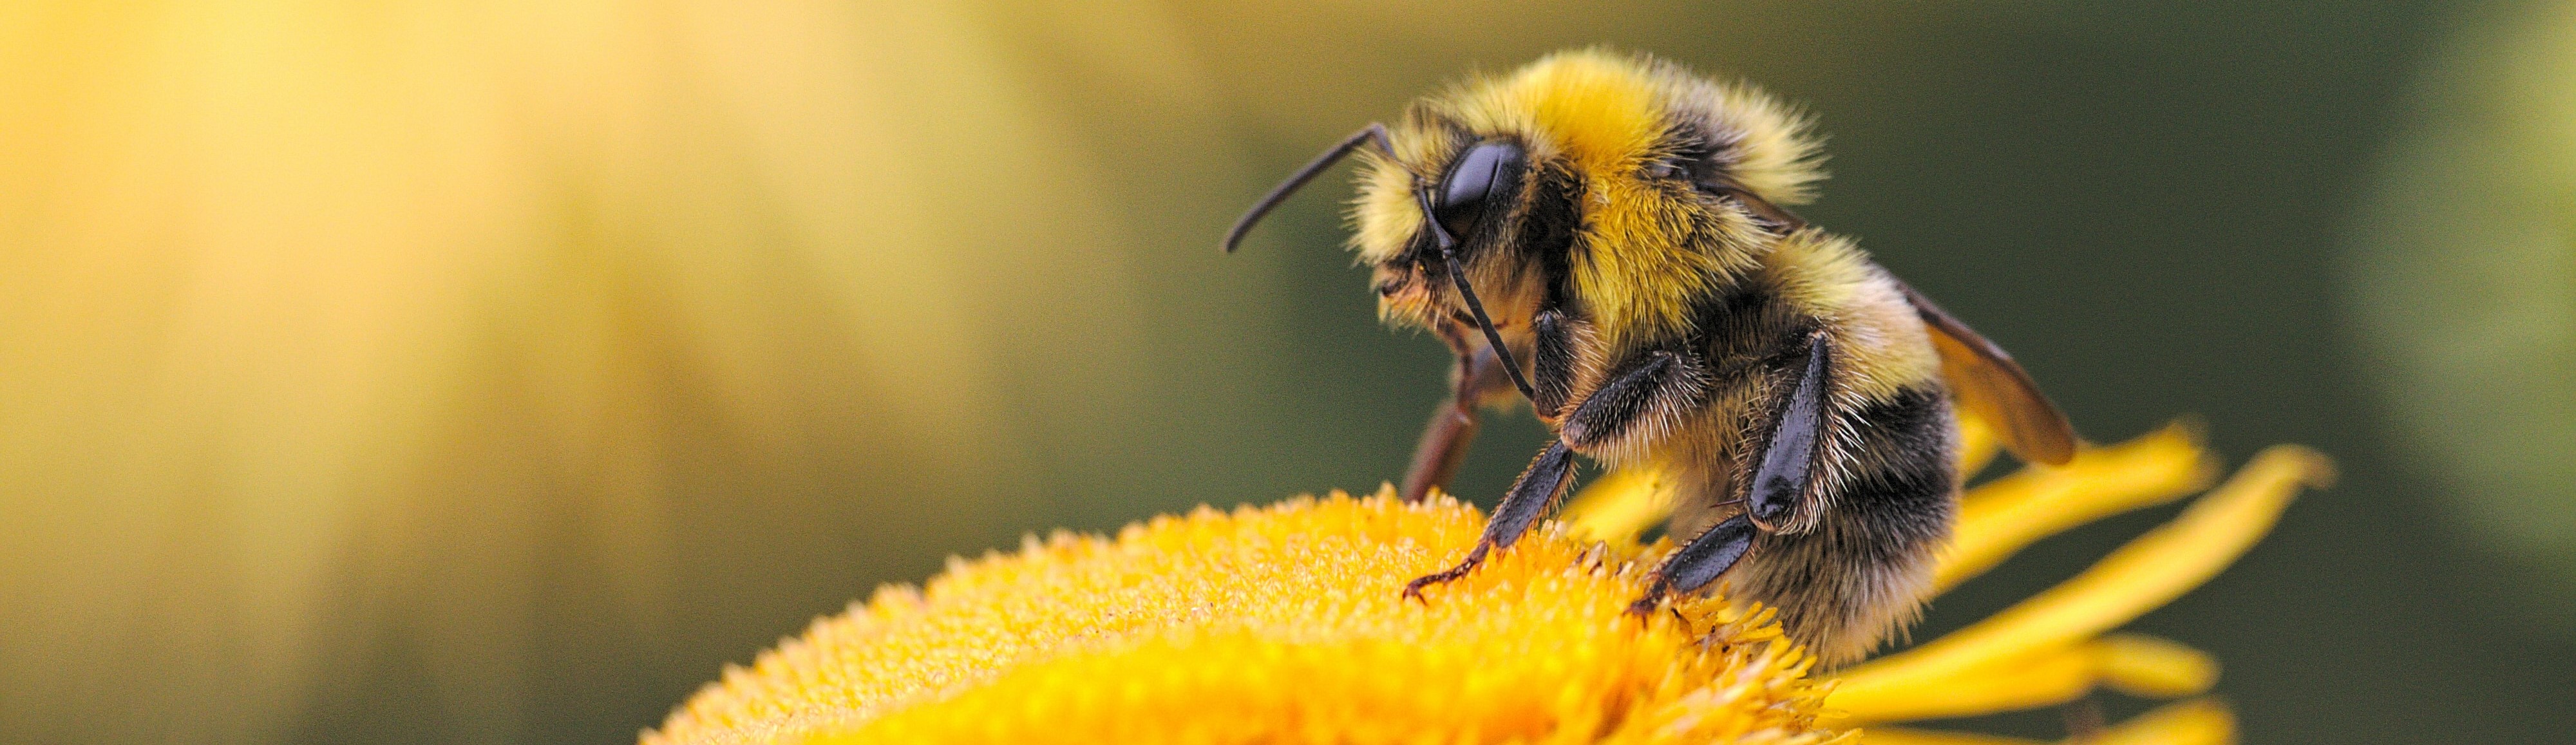 A honey bee gathers pollen from a yellow flower